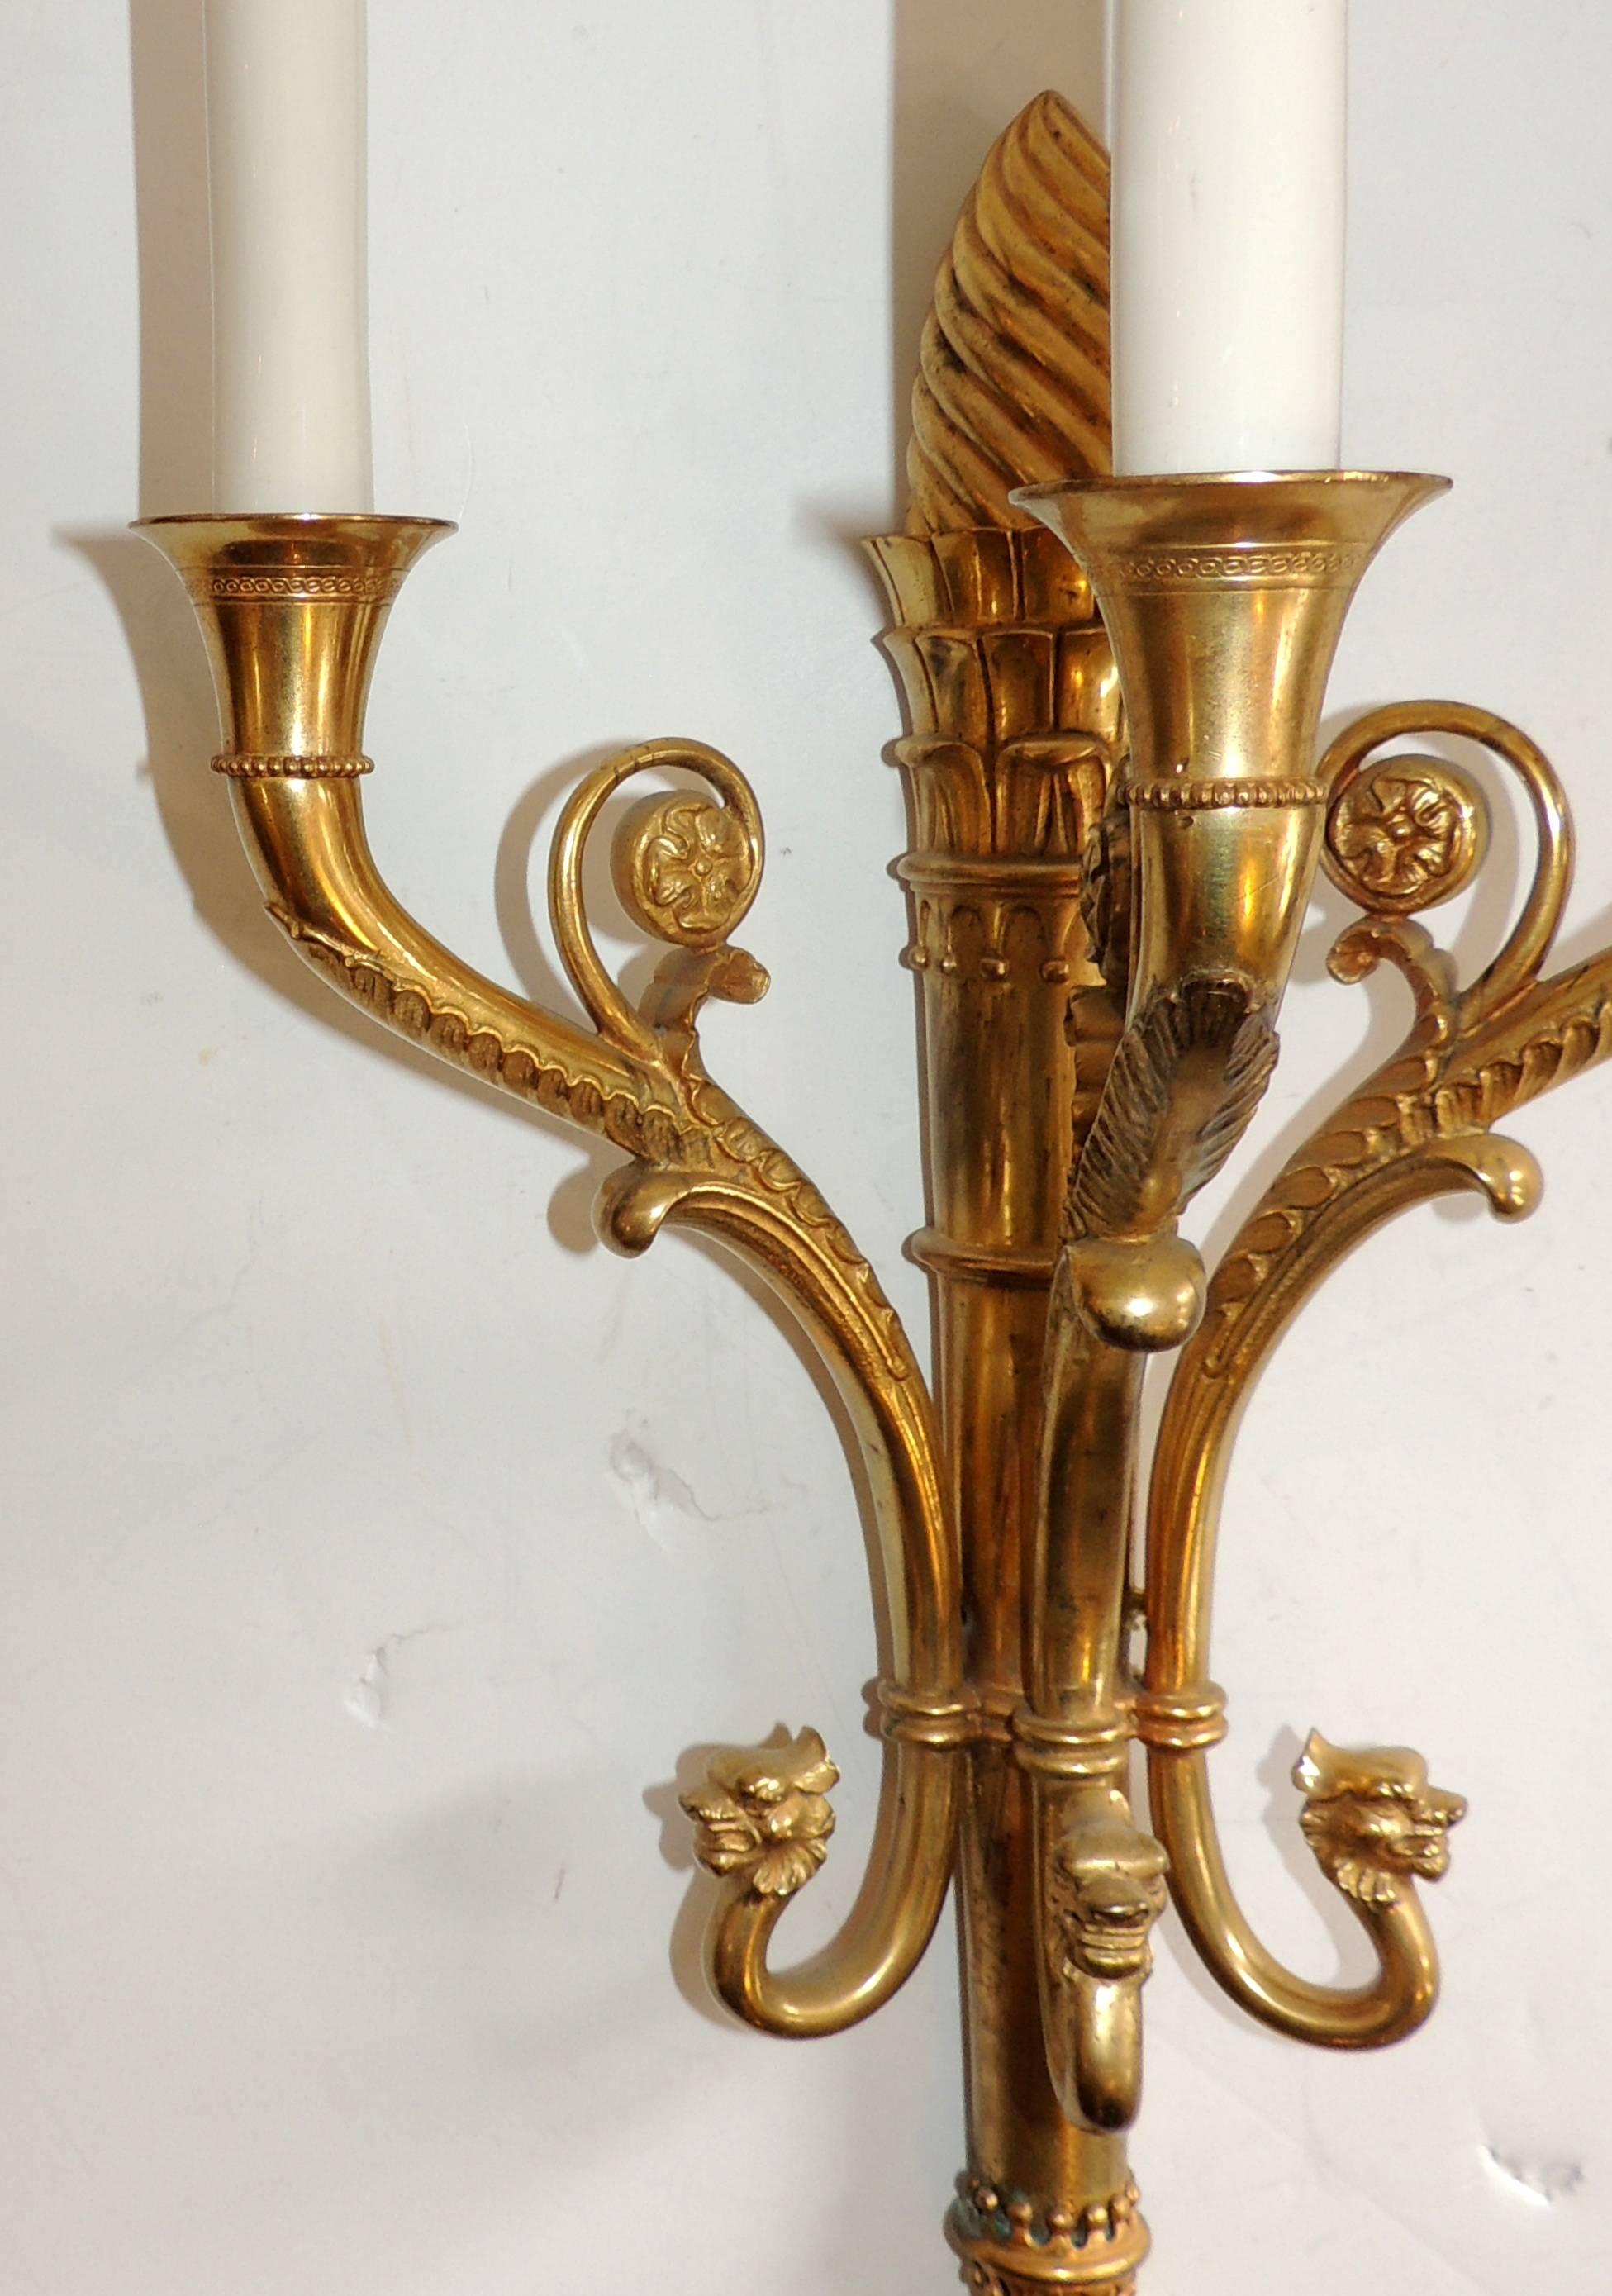 Elegant Pair of Regency Neoclassical French Empire Gilt Doré Bronze Lion Sconces In Good Condition For Sale In Roslyn, NY